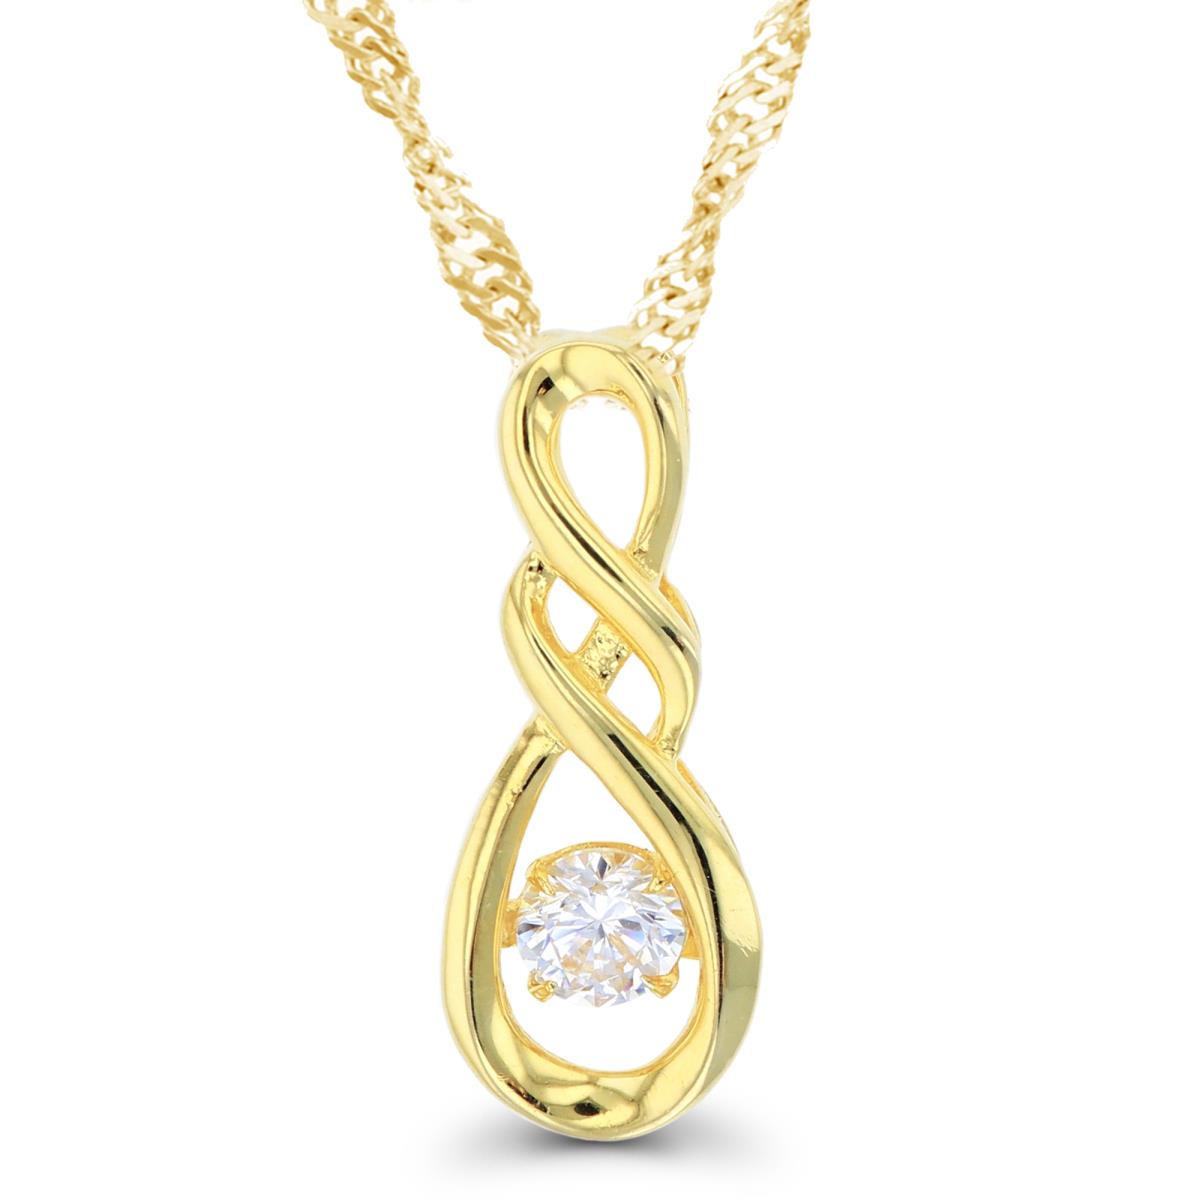 Sterling Silver+1Micron Yellow Gold 5mm Rnd White CZ Dancing in Vertical Infinity 18"+2" Singapore Necklace